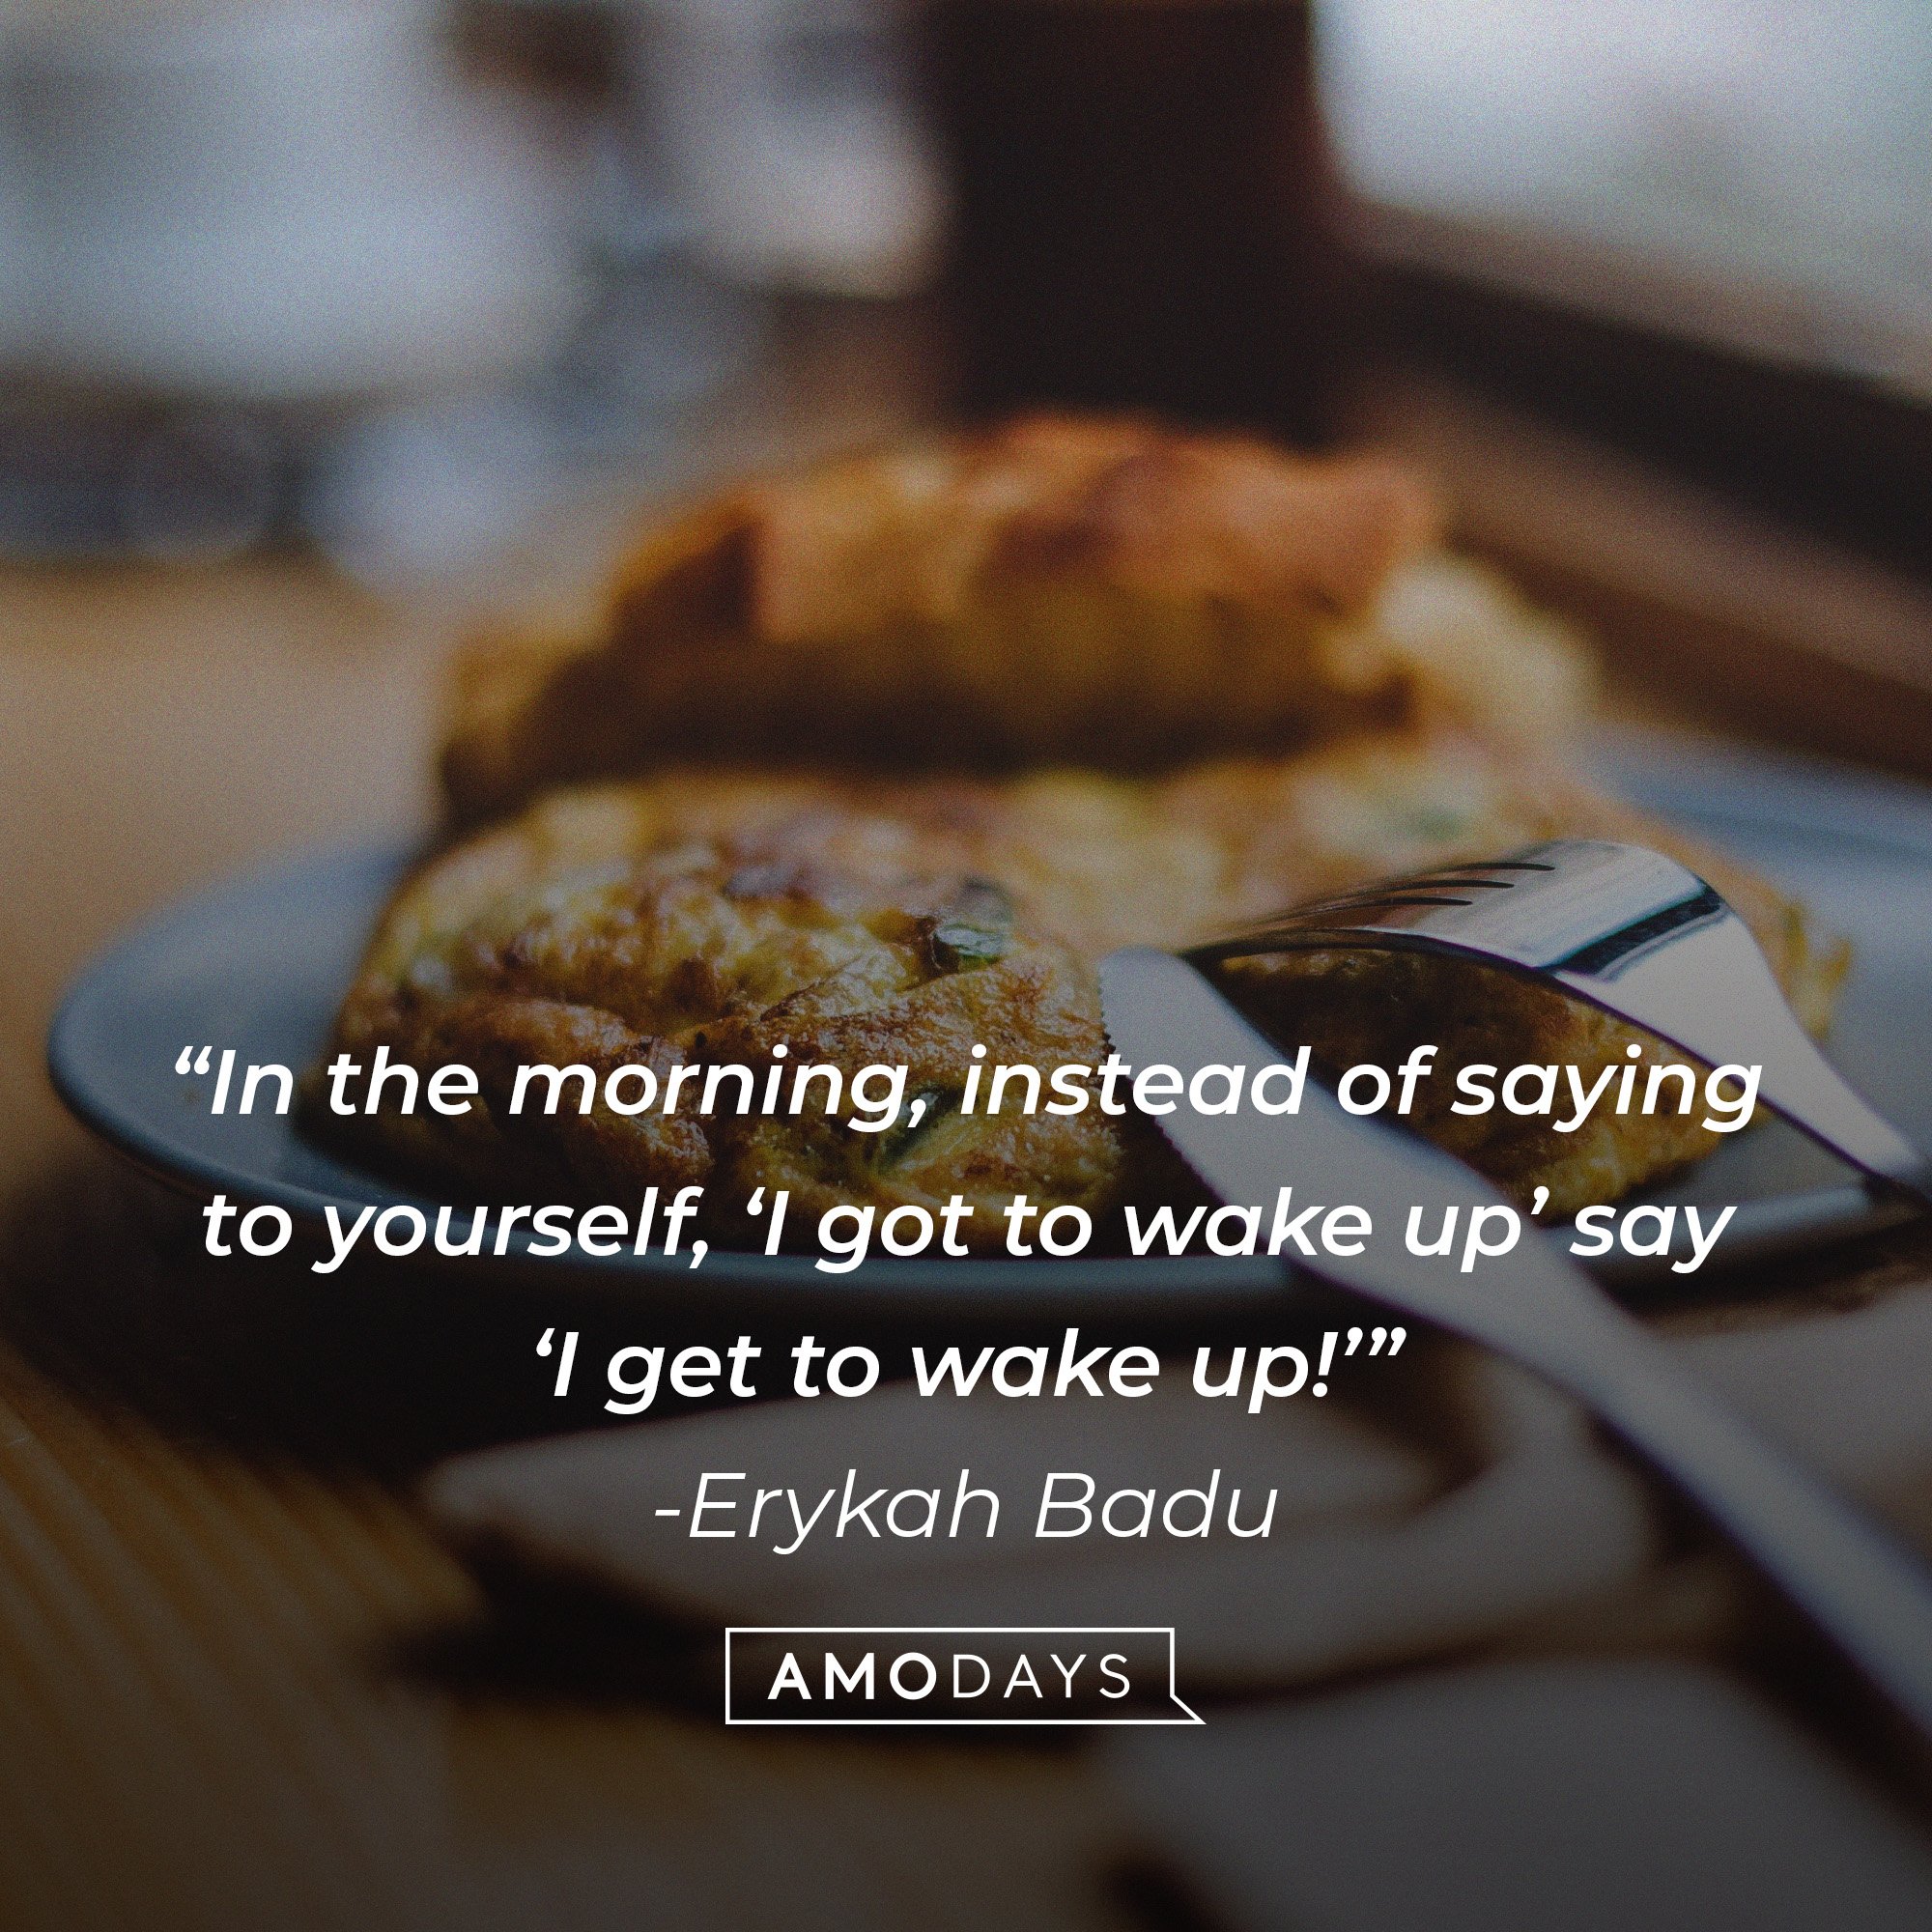  Erykah Badu's quote: "In the morning, instead of saying to yourself, ‘I got to wake up’ say ‘I get to wake up!’” | Image: AmoDays